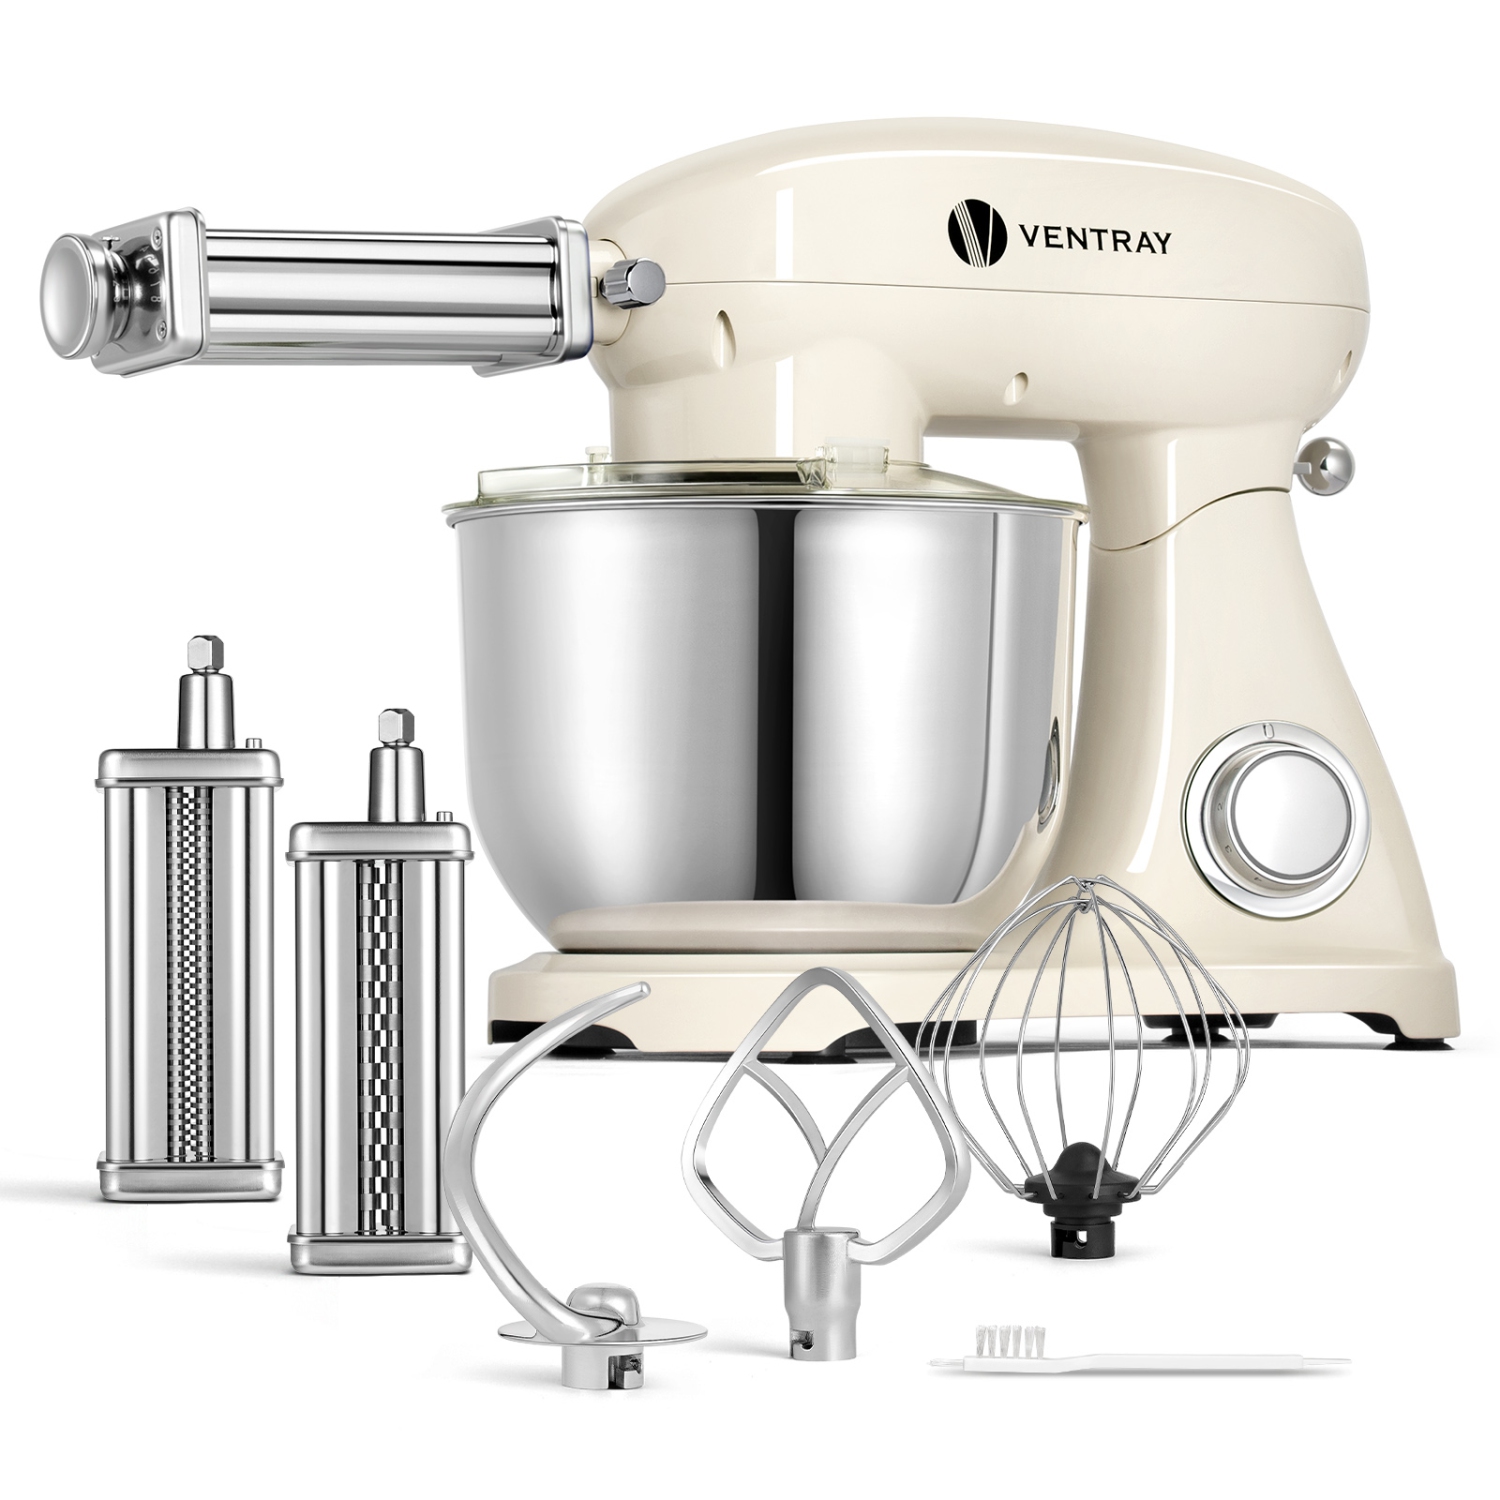 VENTRAY Stand Mixer and 3 Piece Pasta Roller & Cutter Bundle - Beige